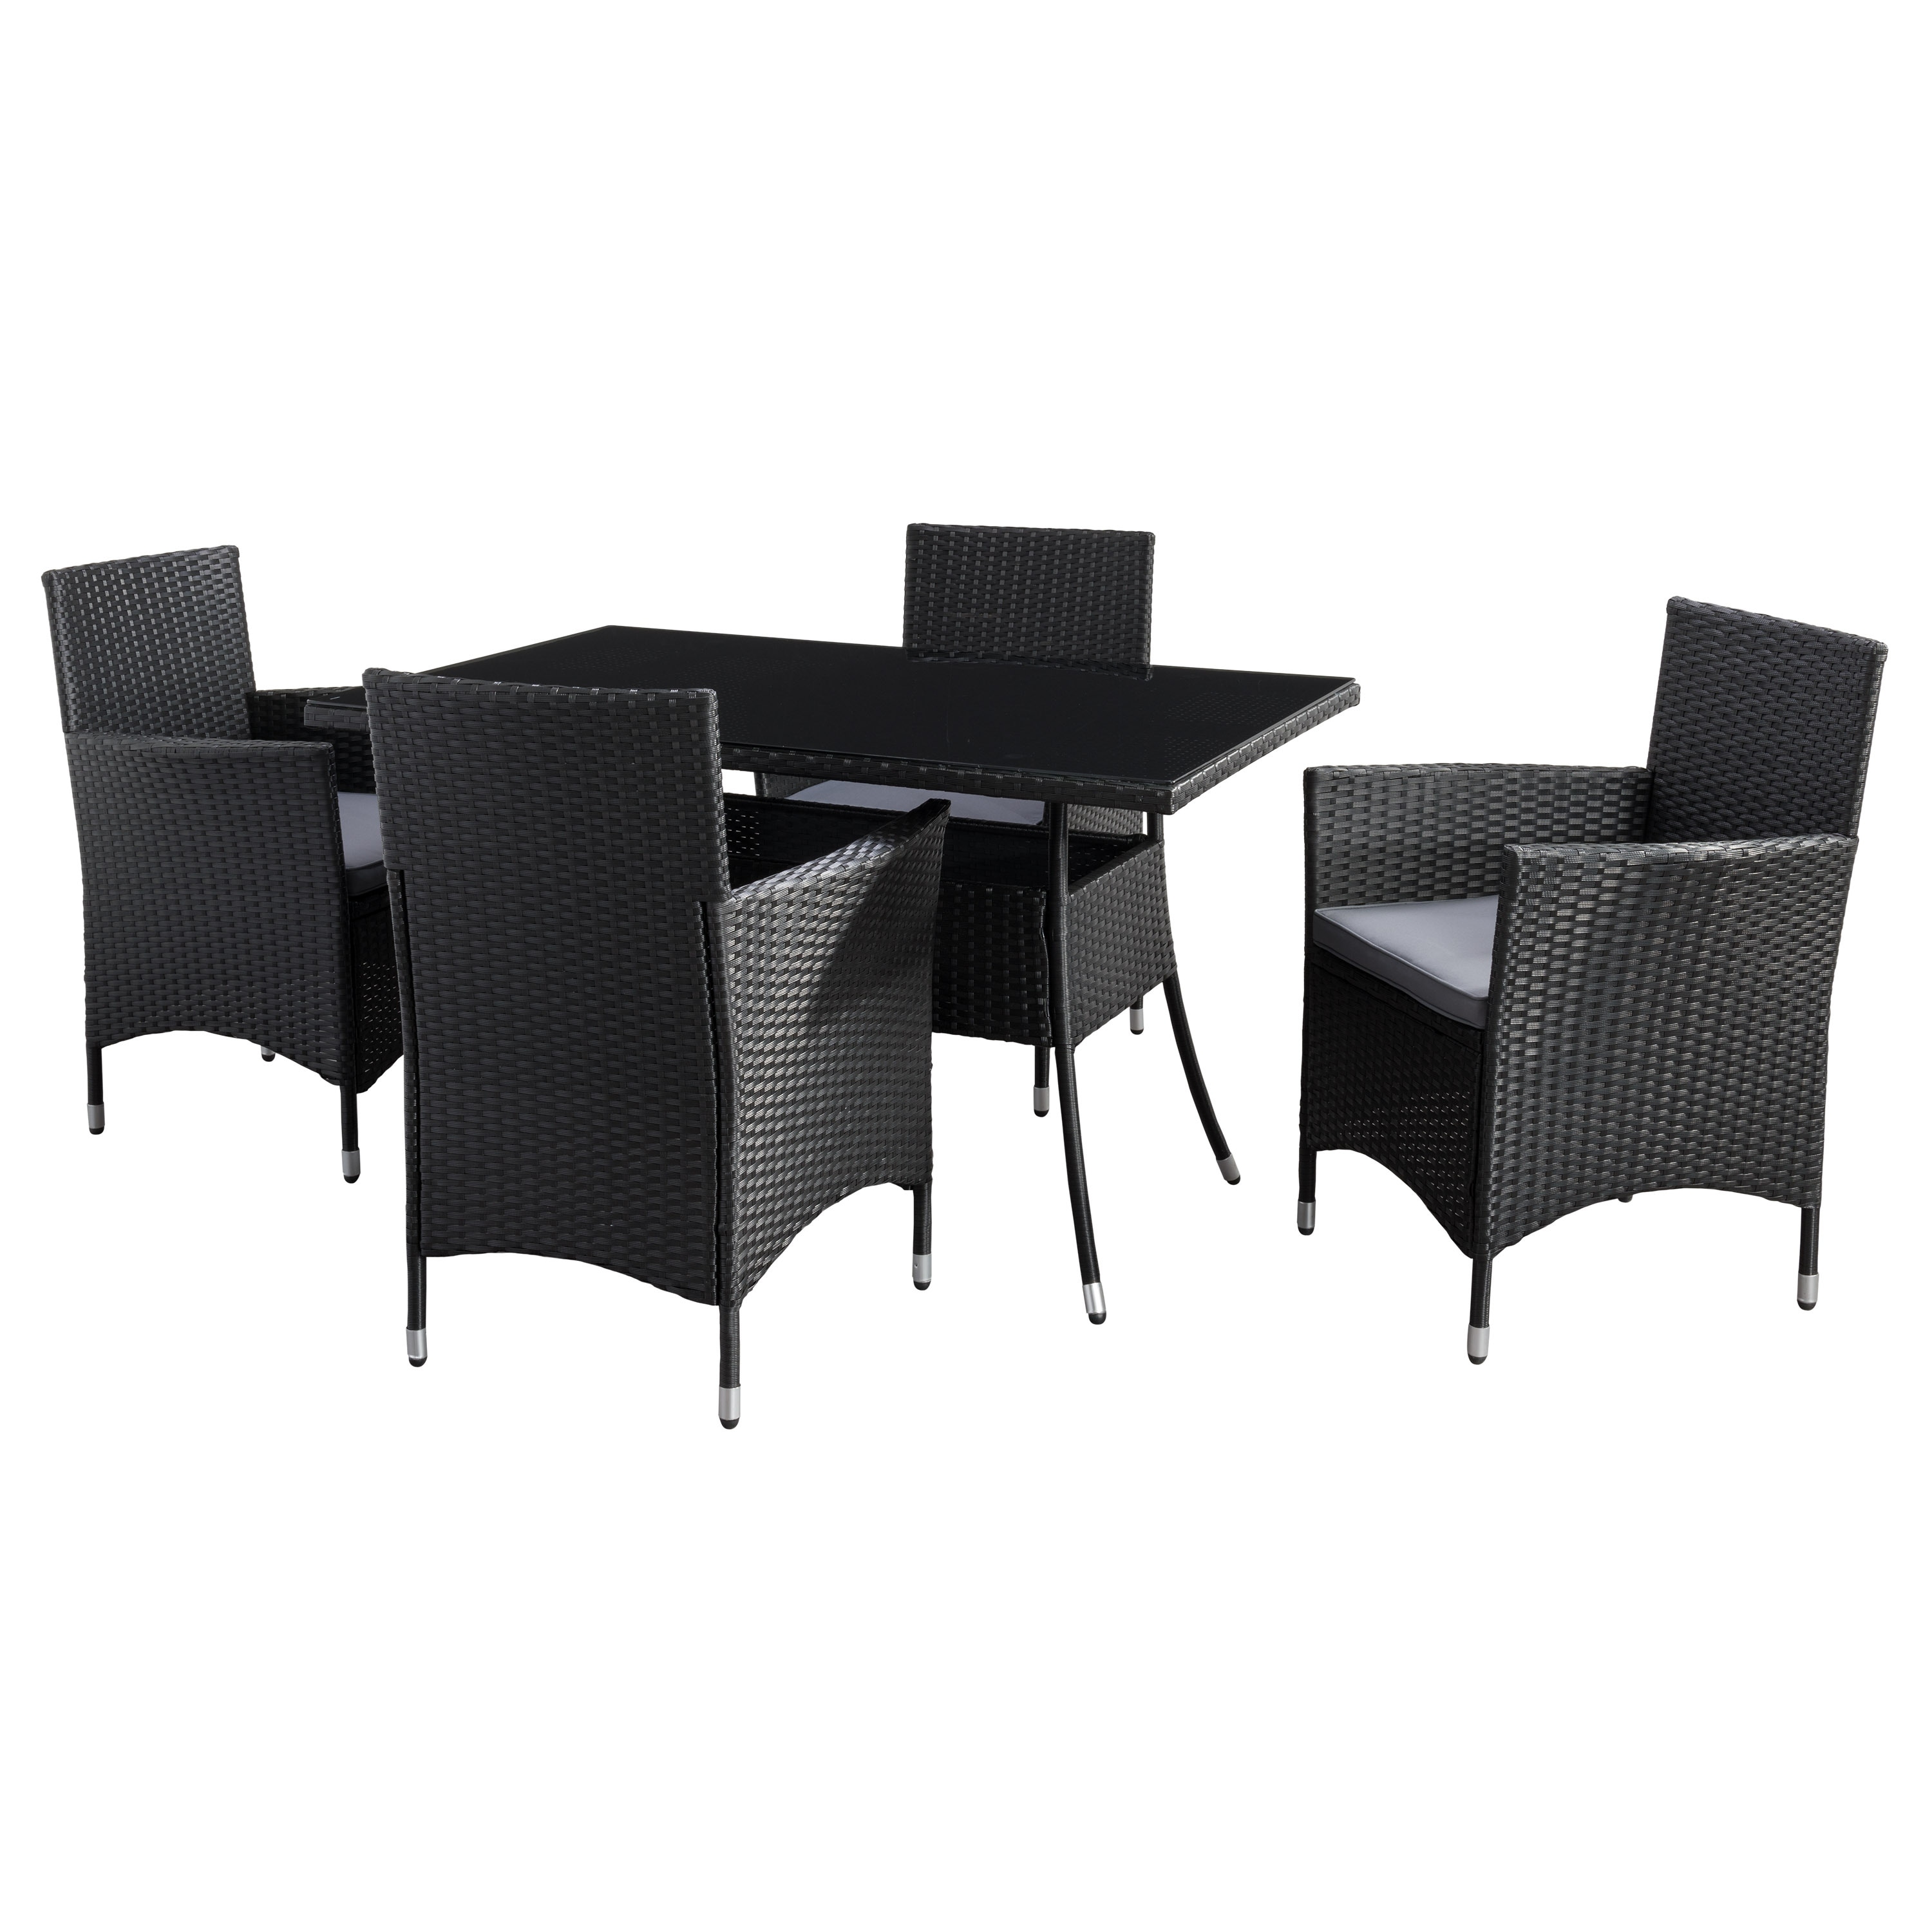 Corliving Parksville Rectangle Patio Dining Set - Black Finish/ash Grey Cushions 5pc